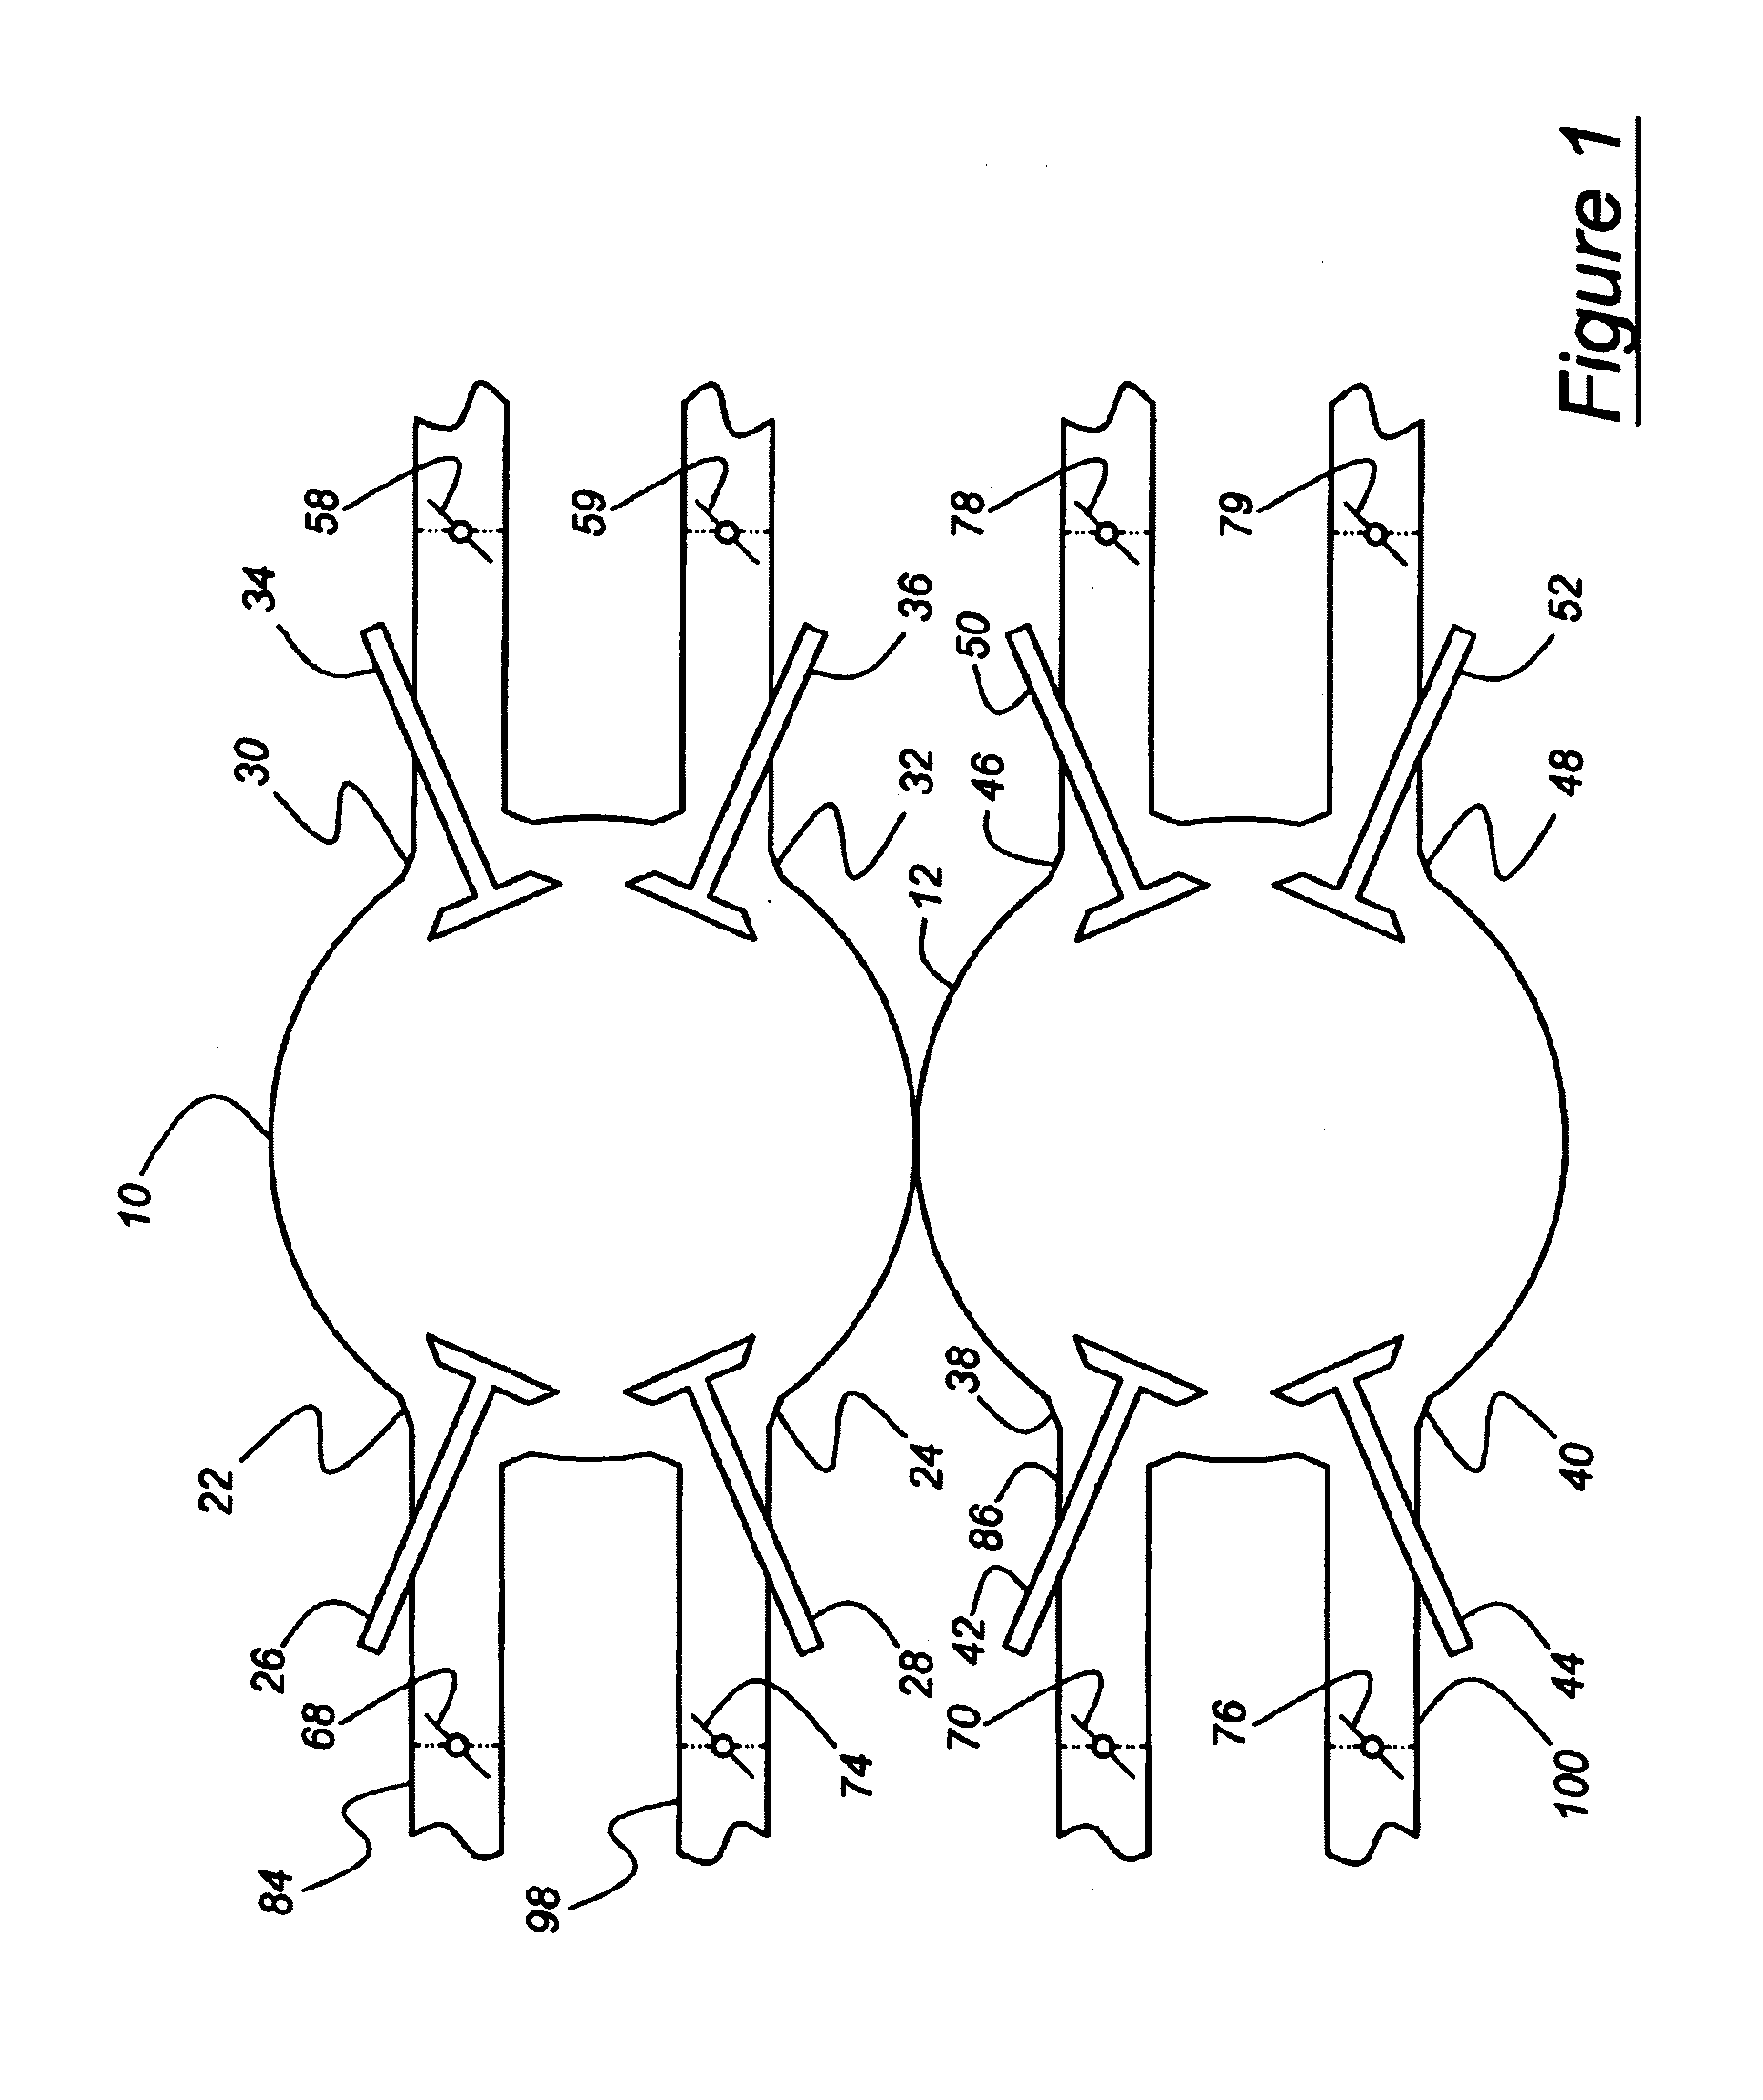 Indirect variable valve actuation for an internal combustion engine